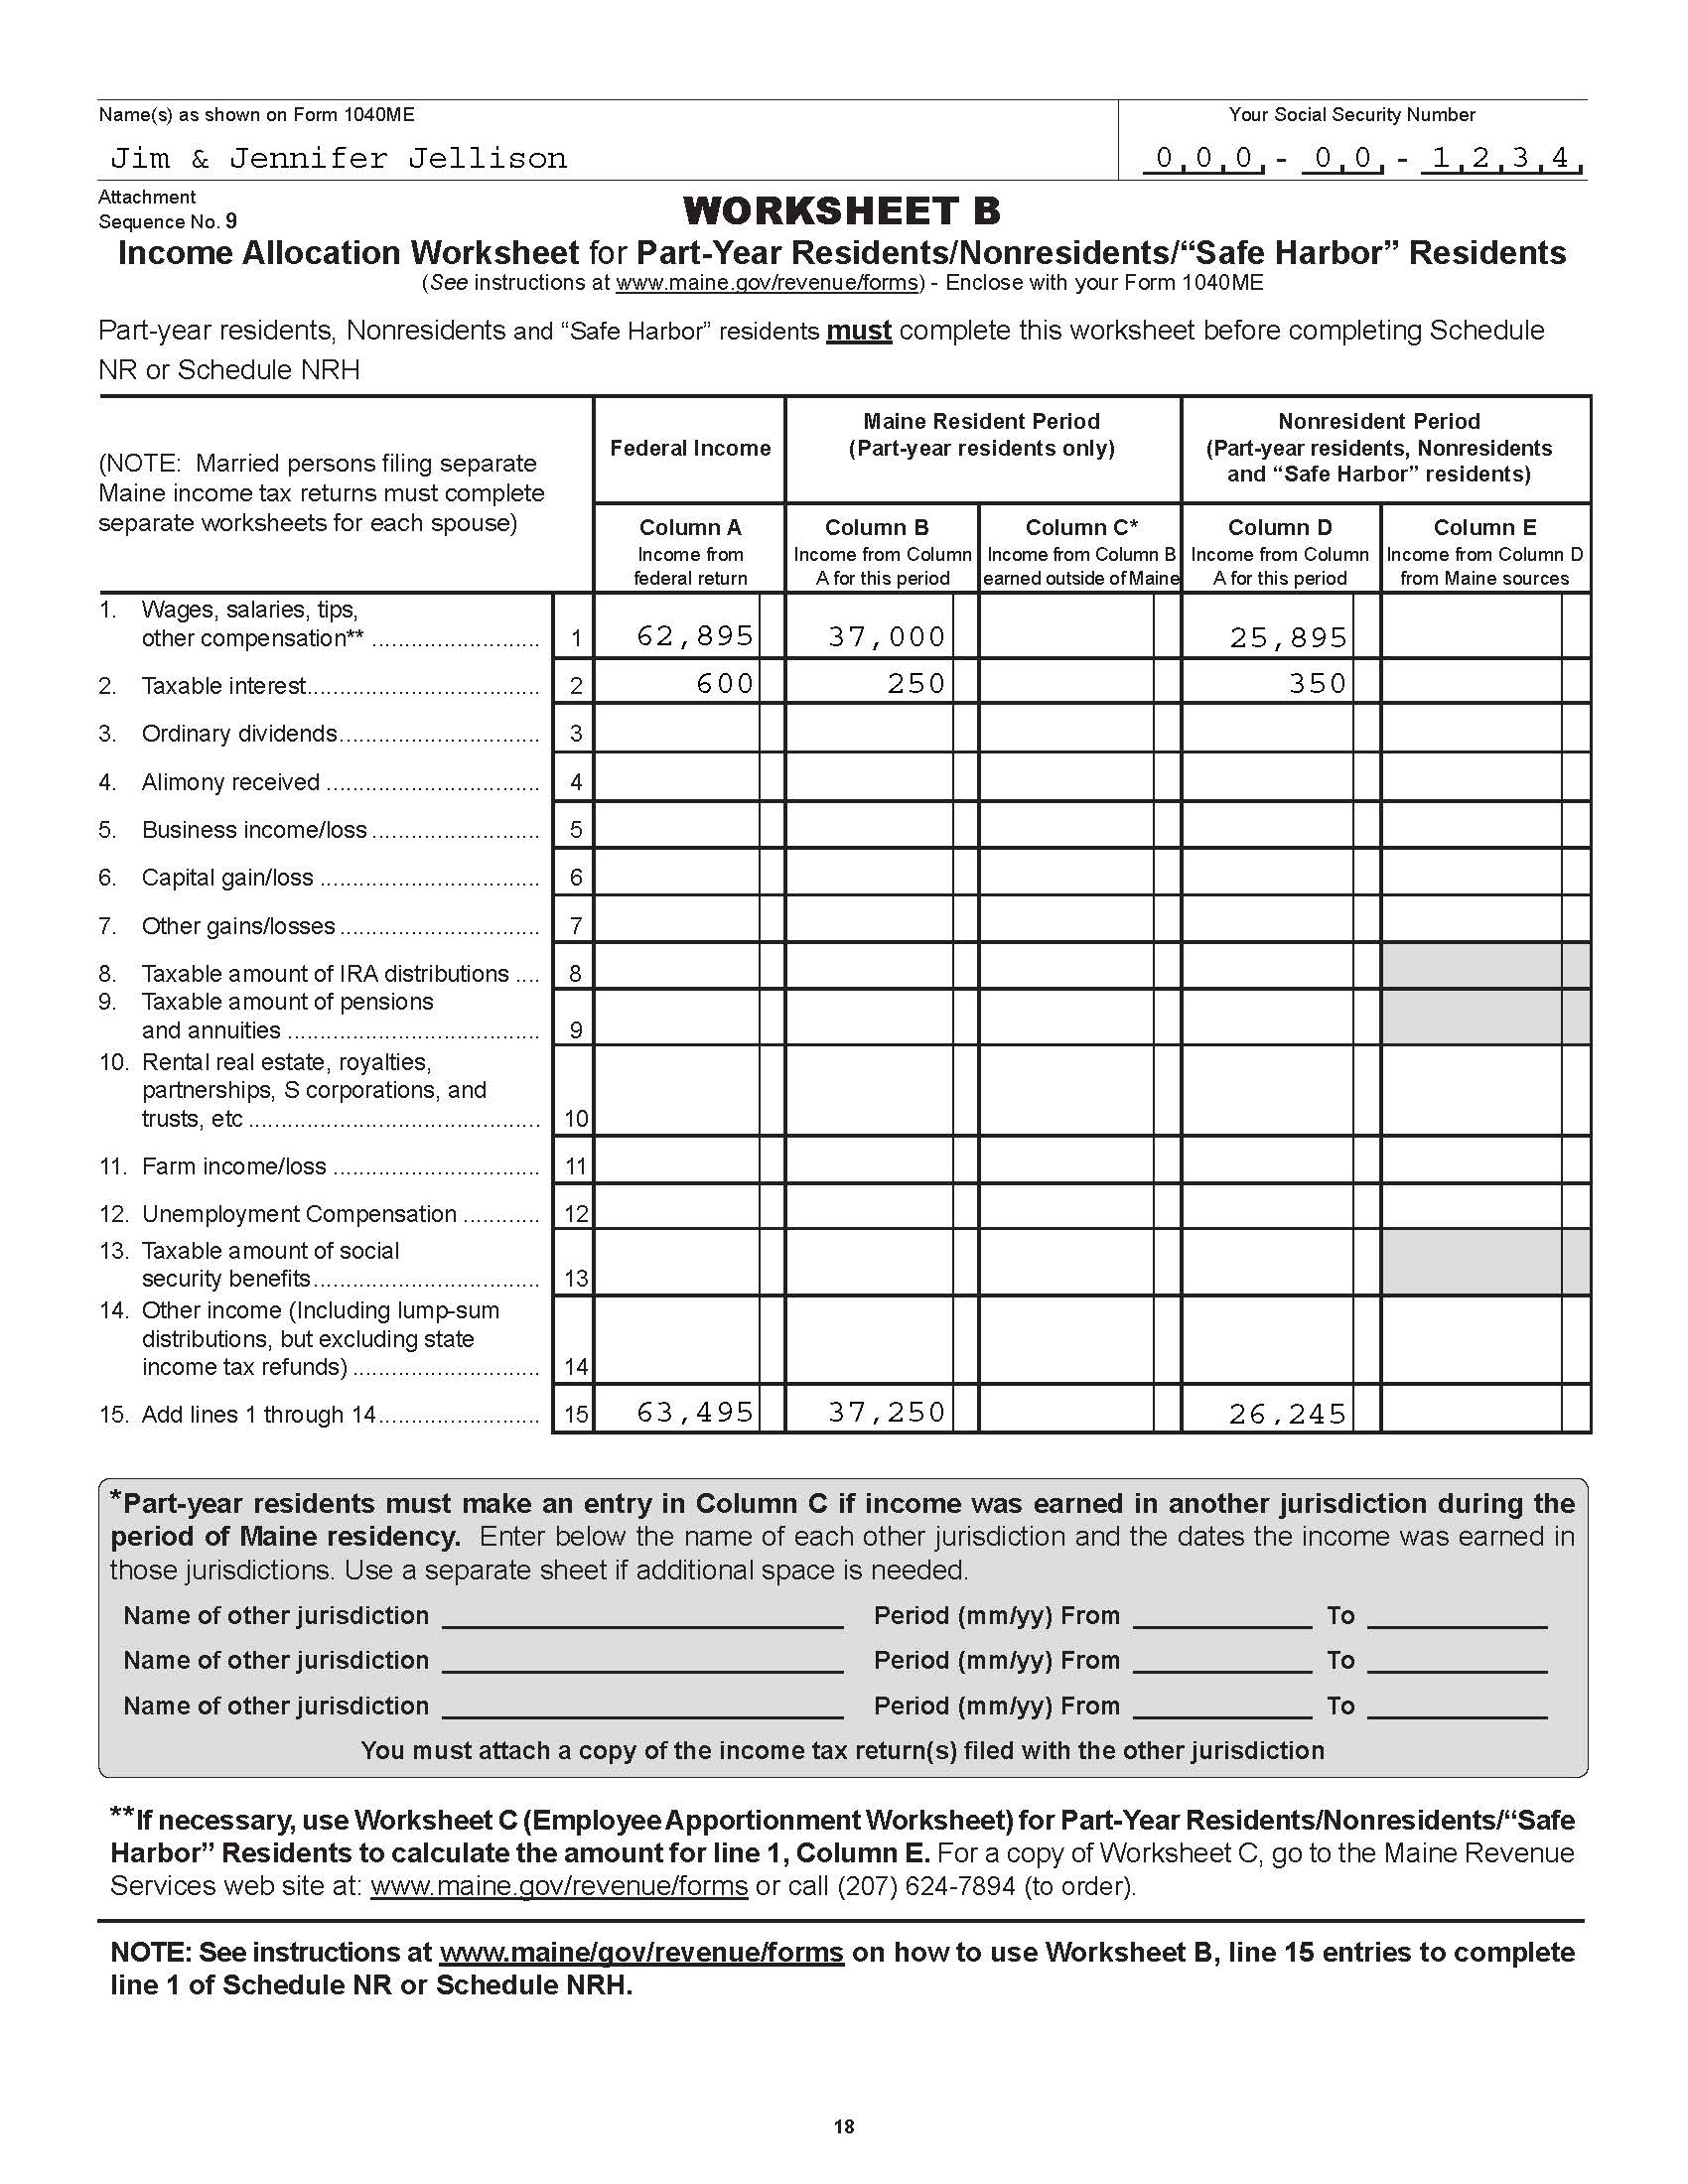 14-best-images-of-irs-itemized-deductions-worksheet-tax-itemized